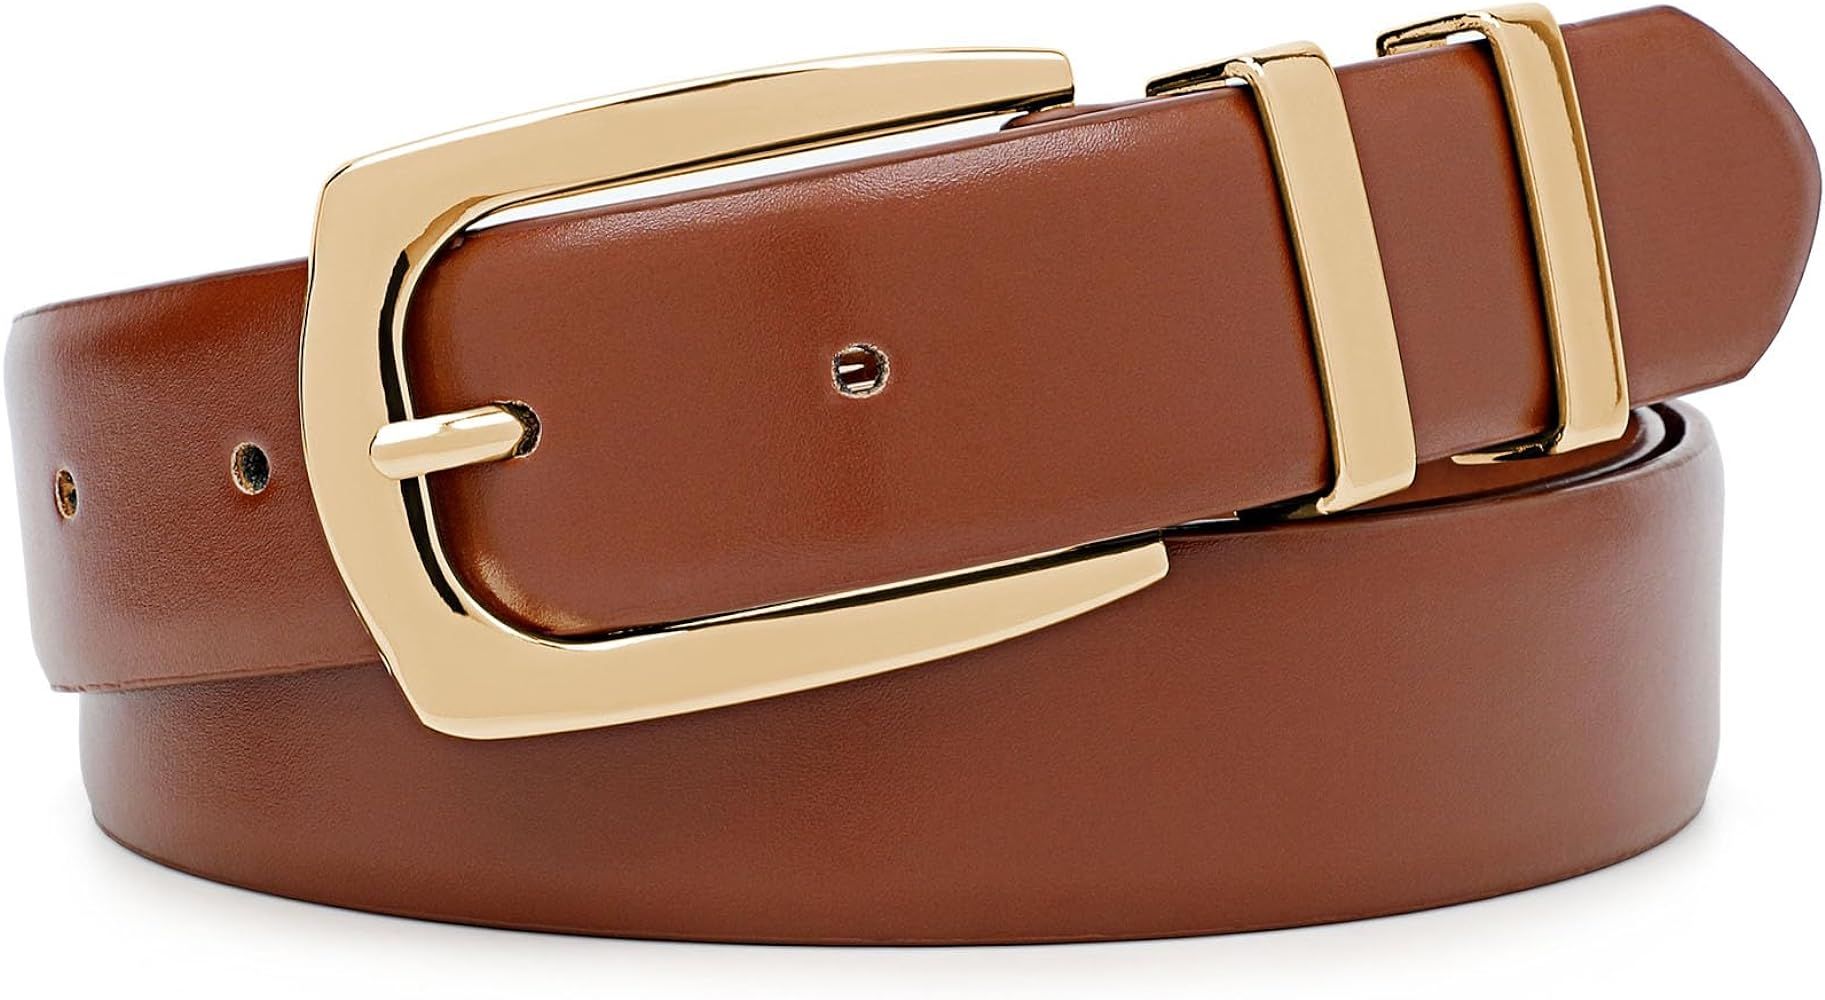 WHIPPY Women's Leather Belts for Jeans Pants Fashion Ladies Belt Gold Buckle Belts for Women | Amazon (US)